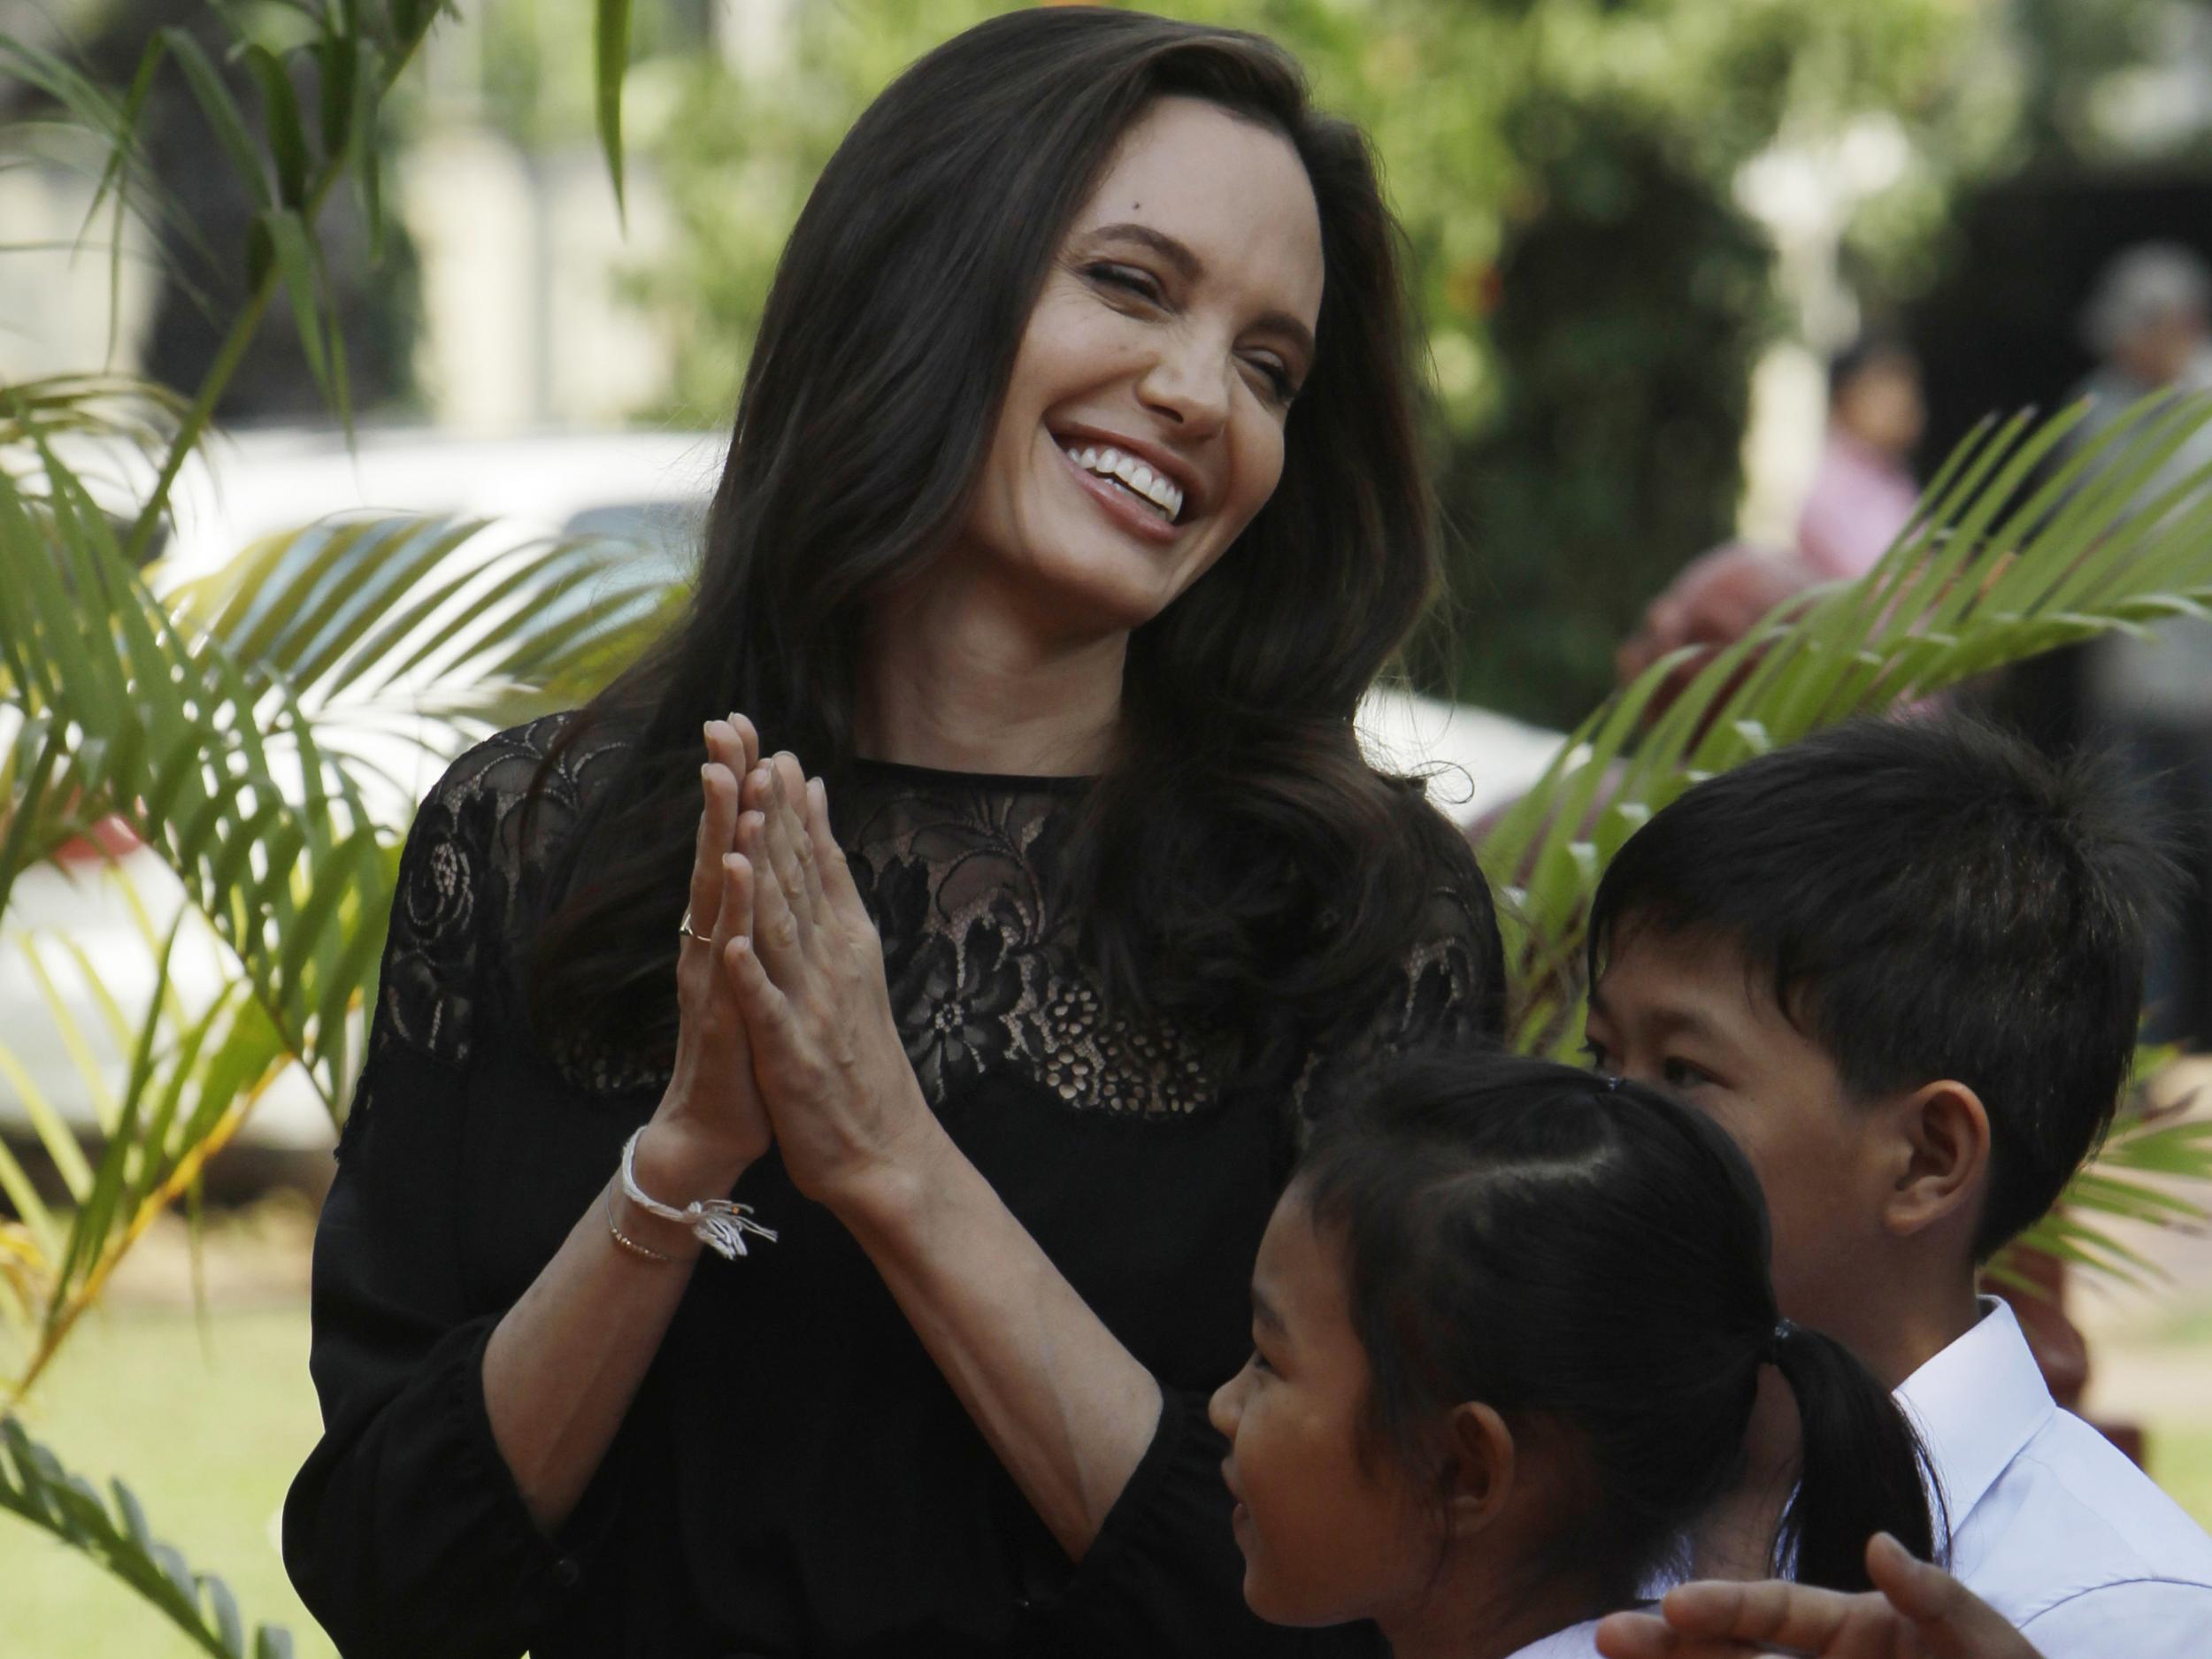 Hollywood actress Angelina Jolie smiles before a press conference in Siem Reap province, Cambodia, on February 18 2017